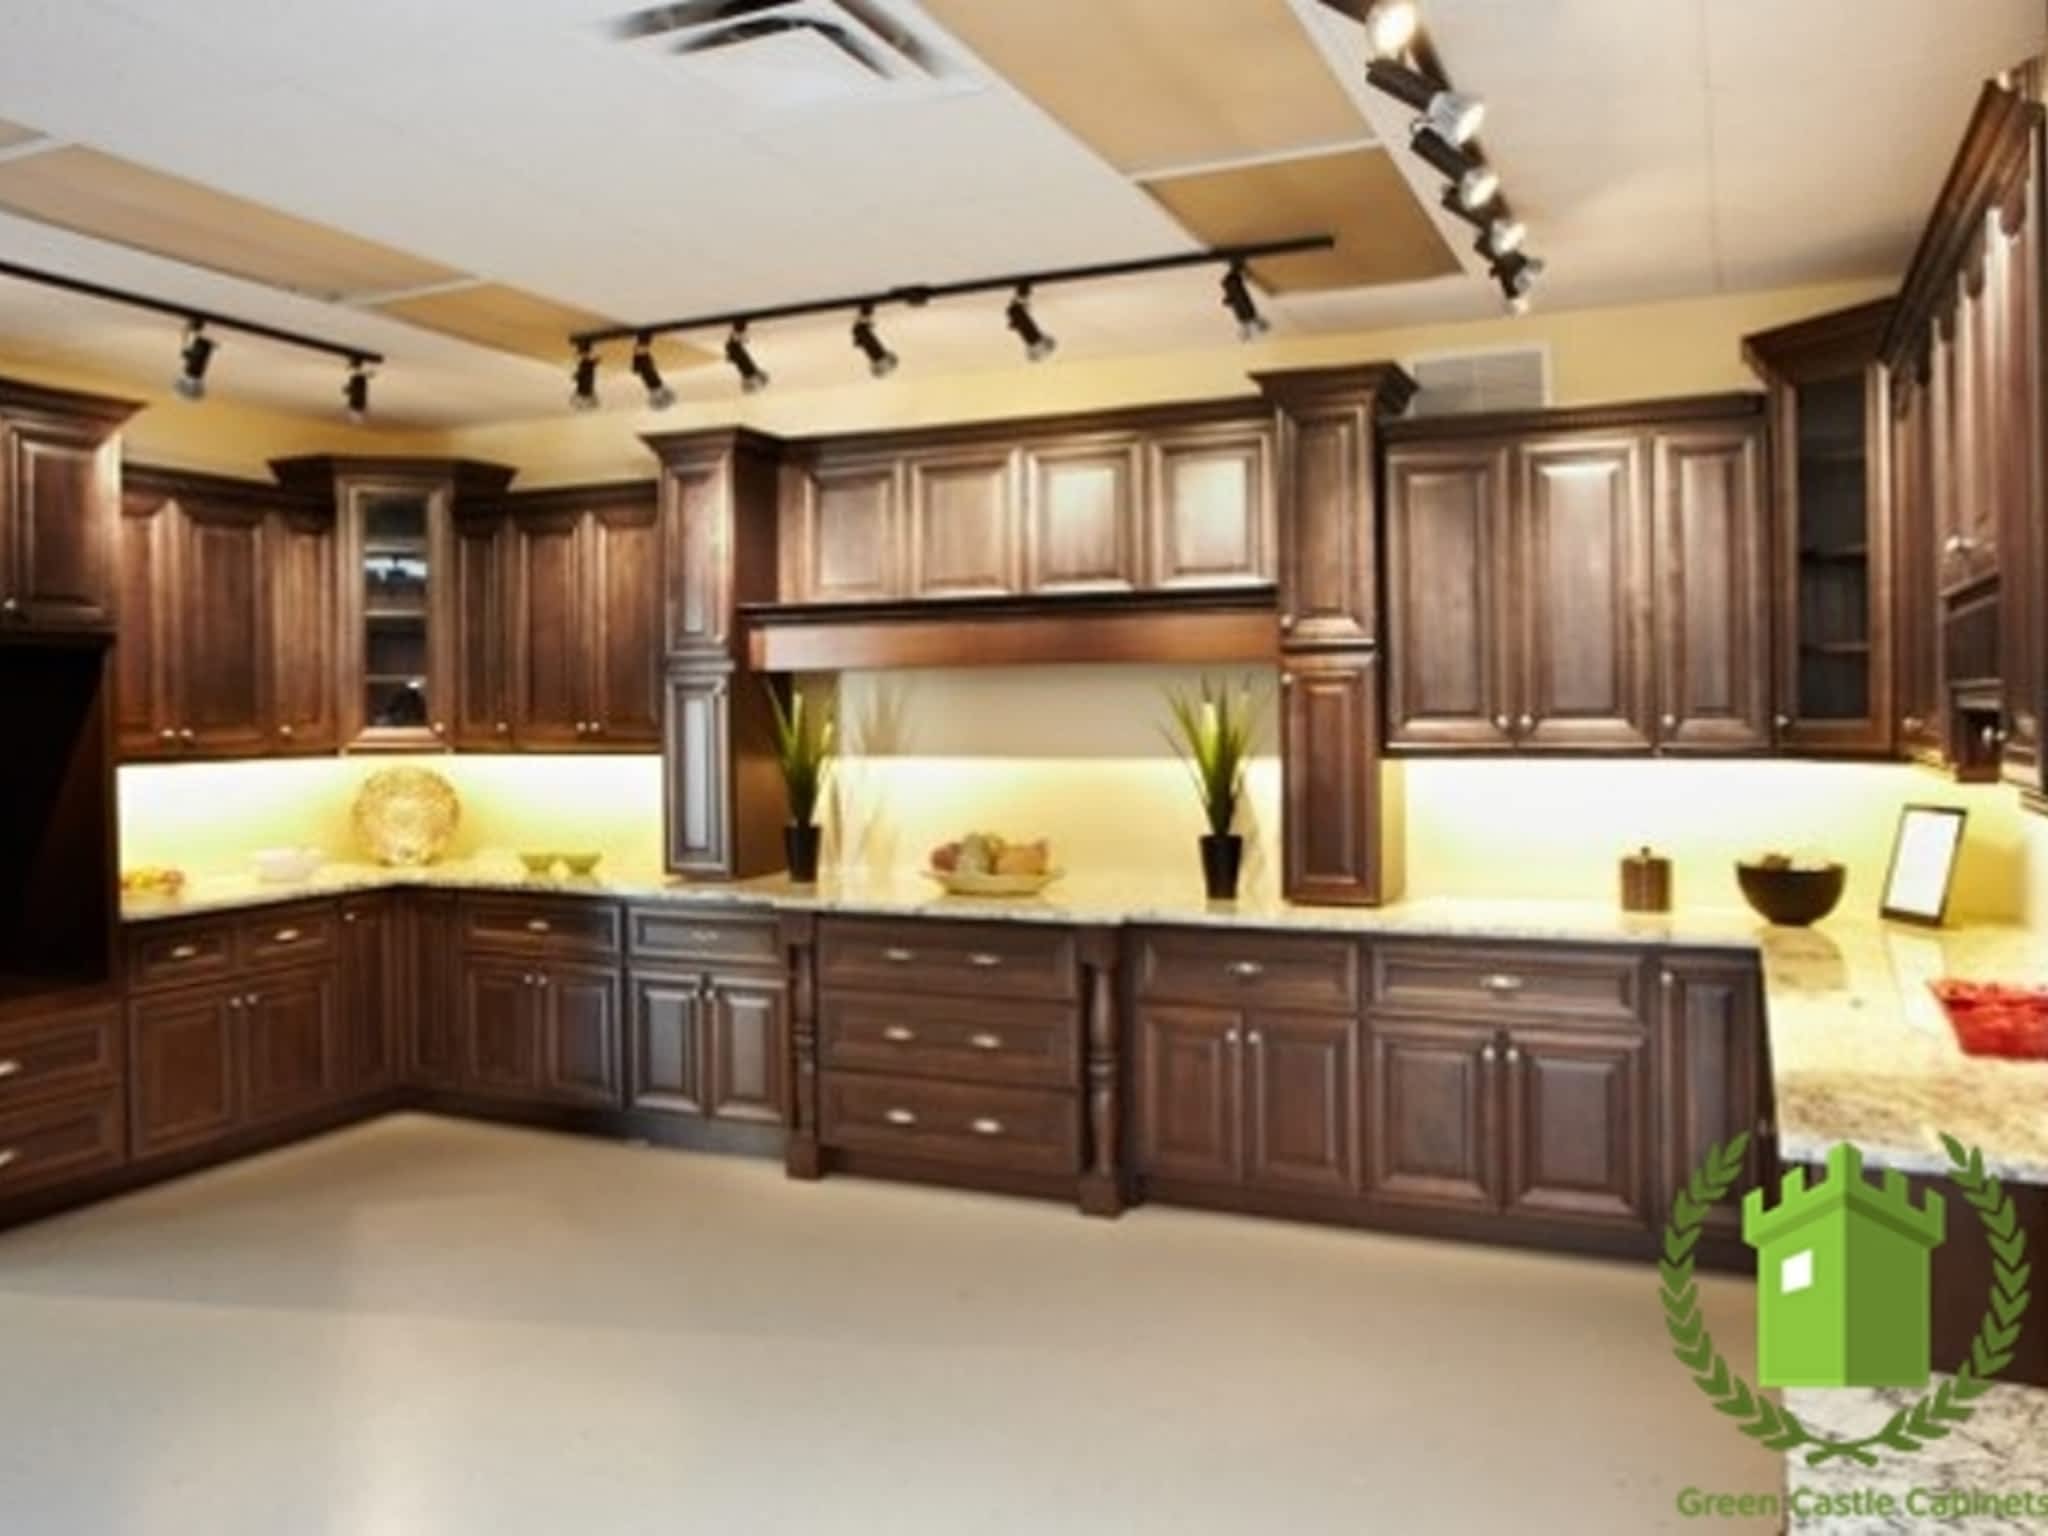 photo Green Castle Cabinets